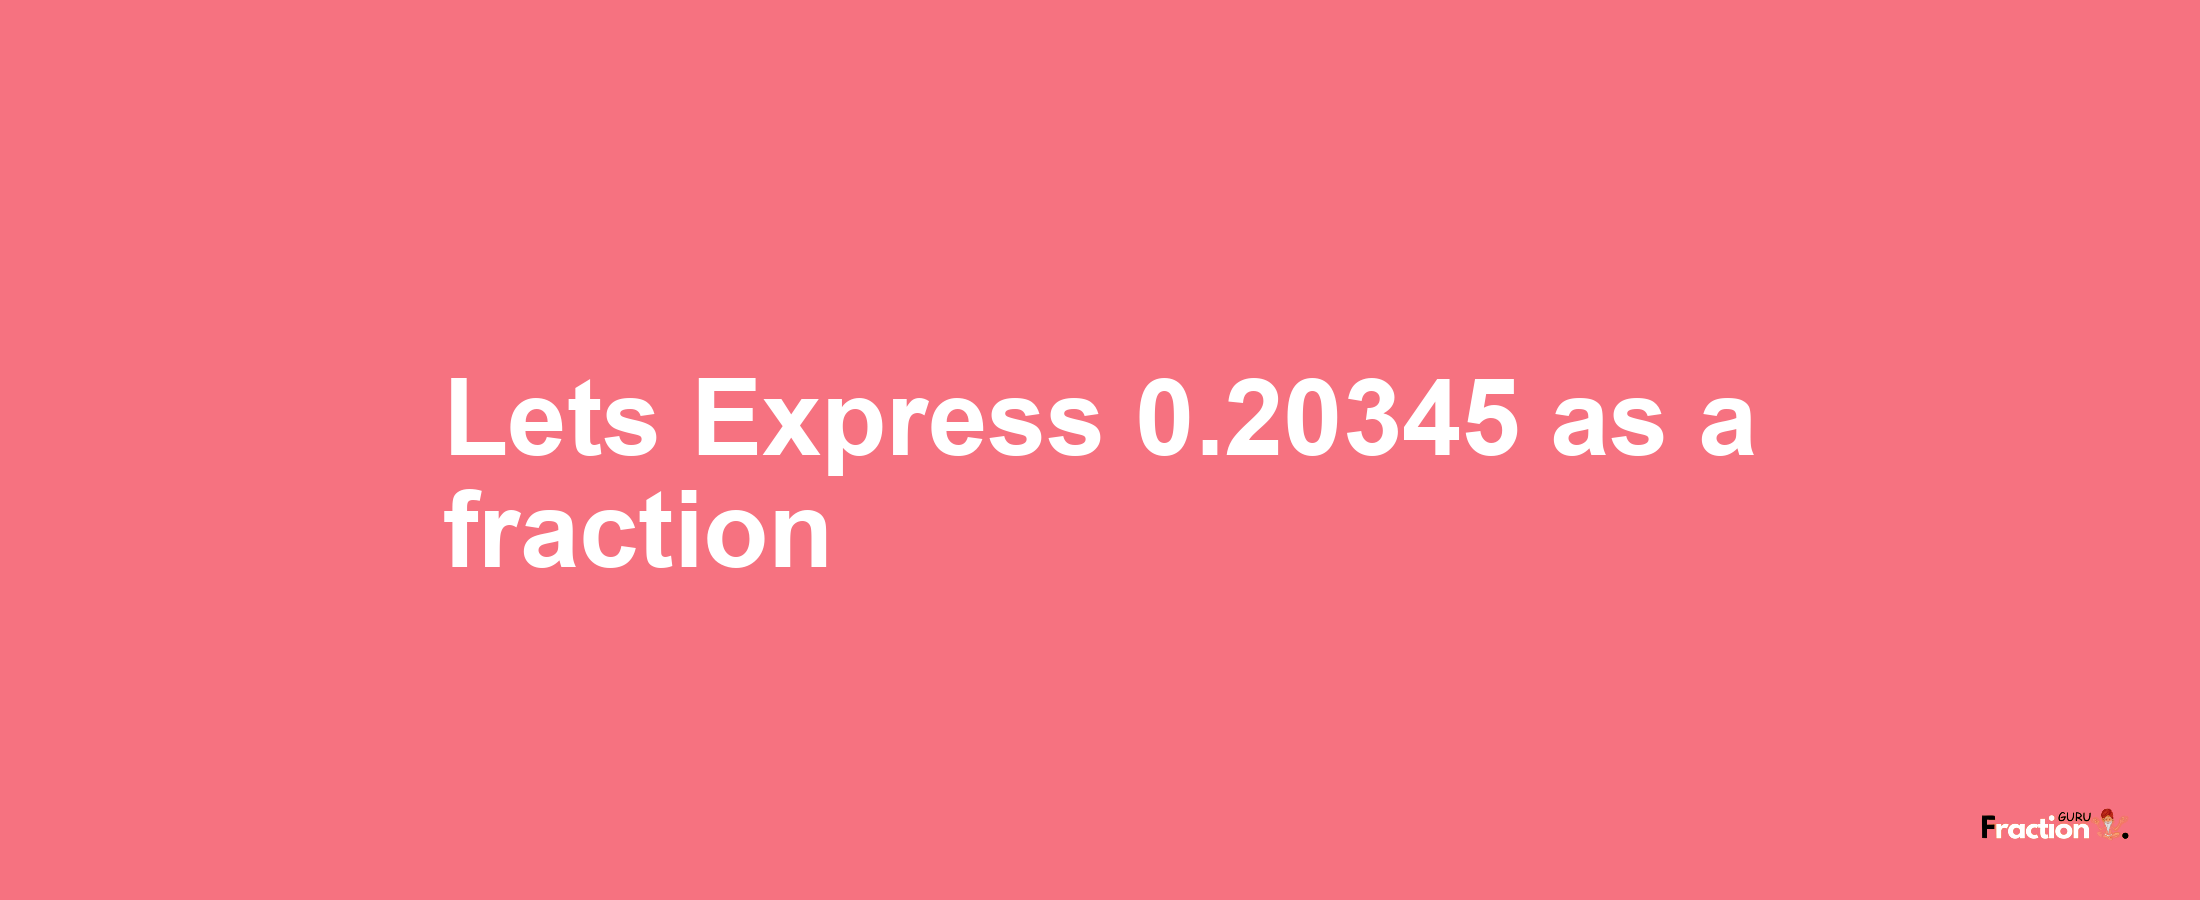 Lets Express 0.20345 as afraction